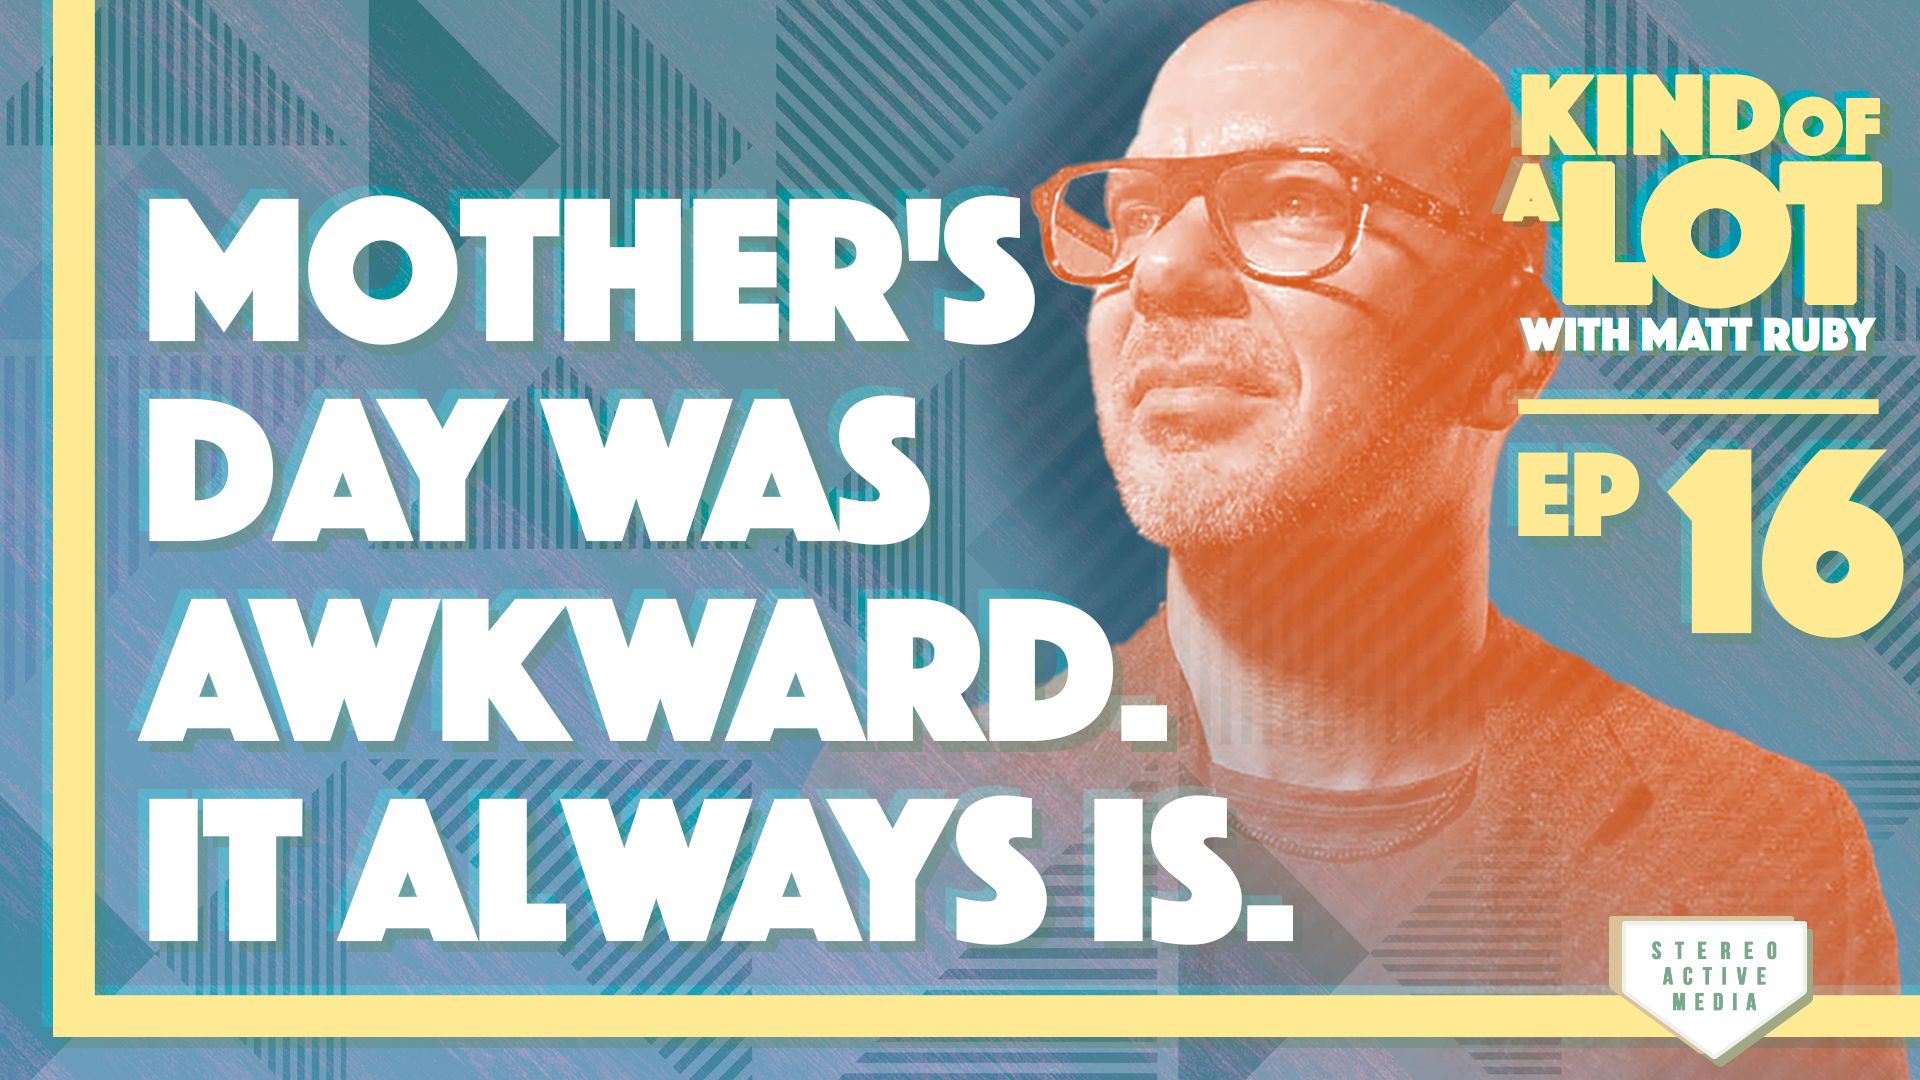 Ep 16 // Mother's Day was awkward. It always is.